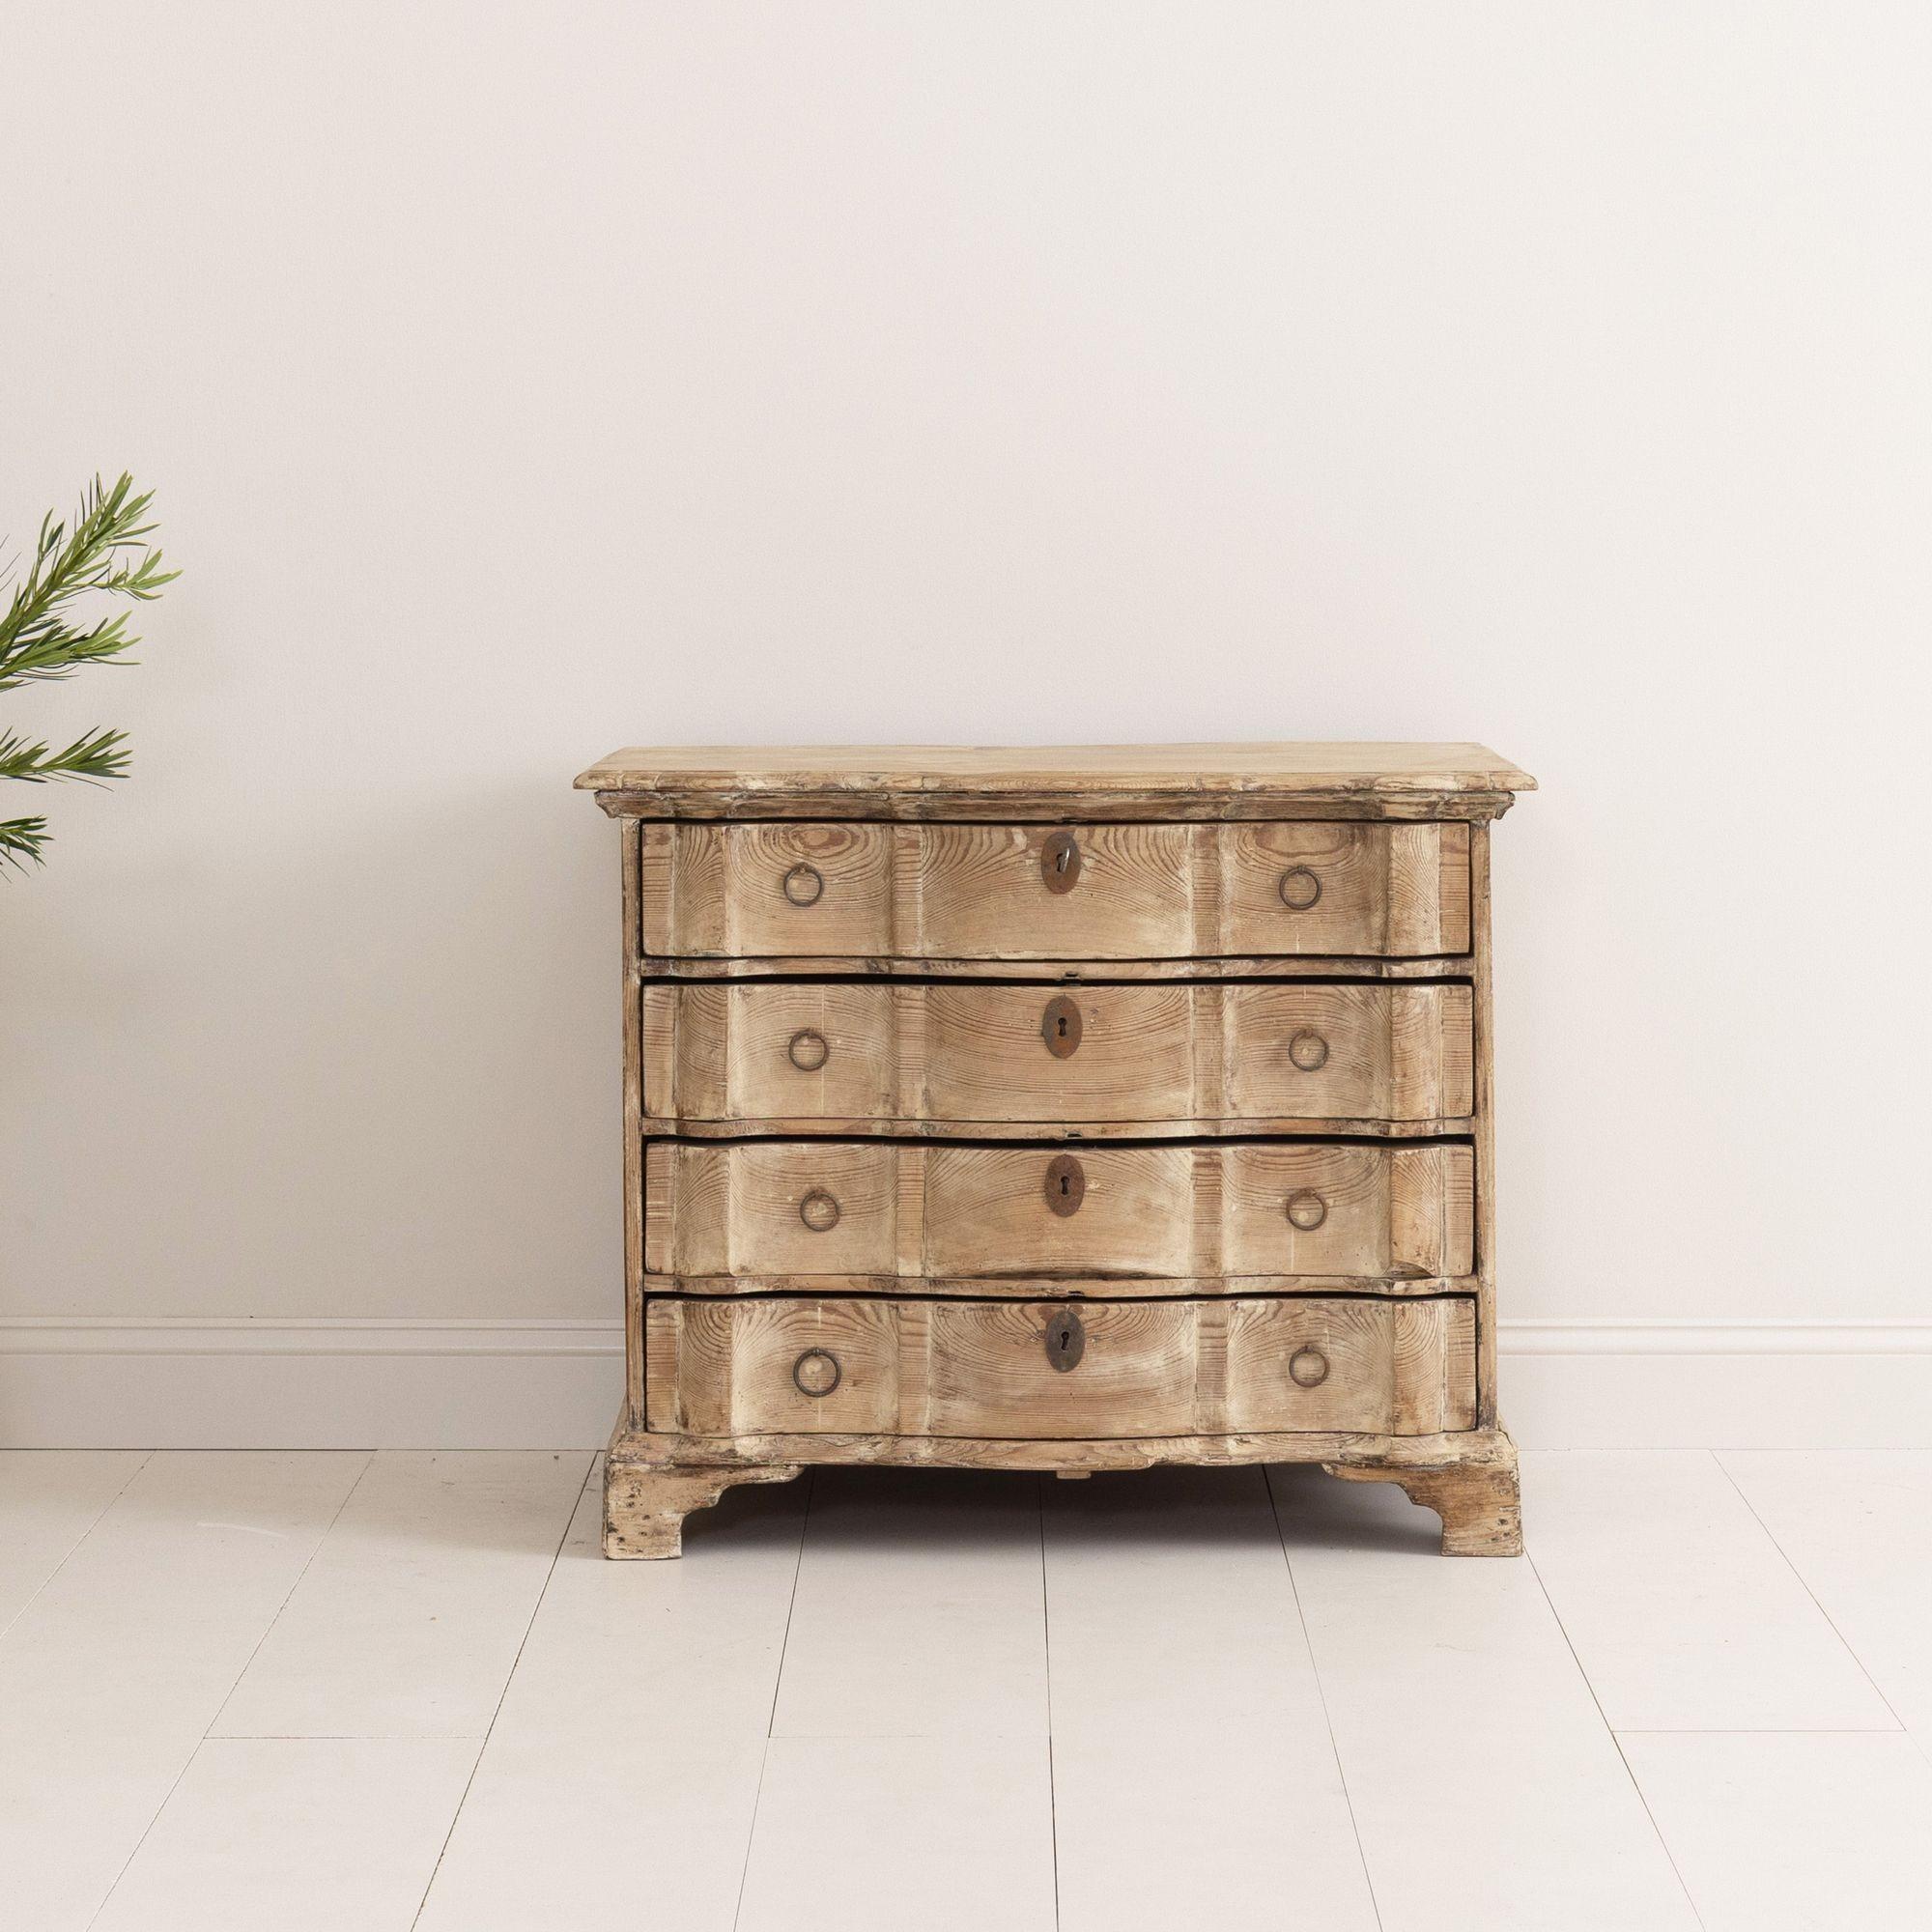 A Danish commode from the 18th c. in original natural patina. A shaped top and beautifully carved arbalette shaped drawers with original iron hardware standing on a shaped bracket base. 

We offer expedited, fully-insured, custom packaged /